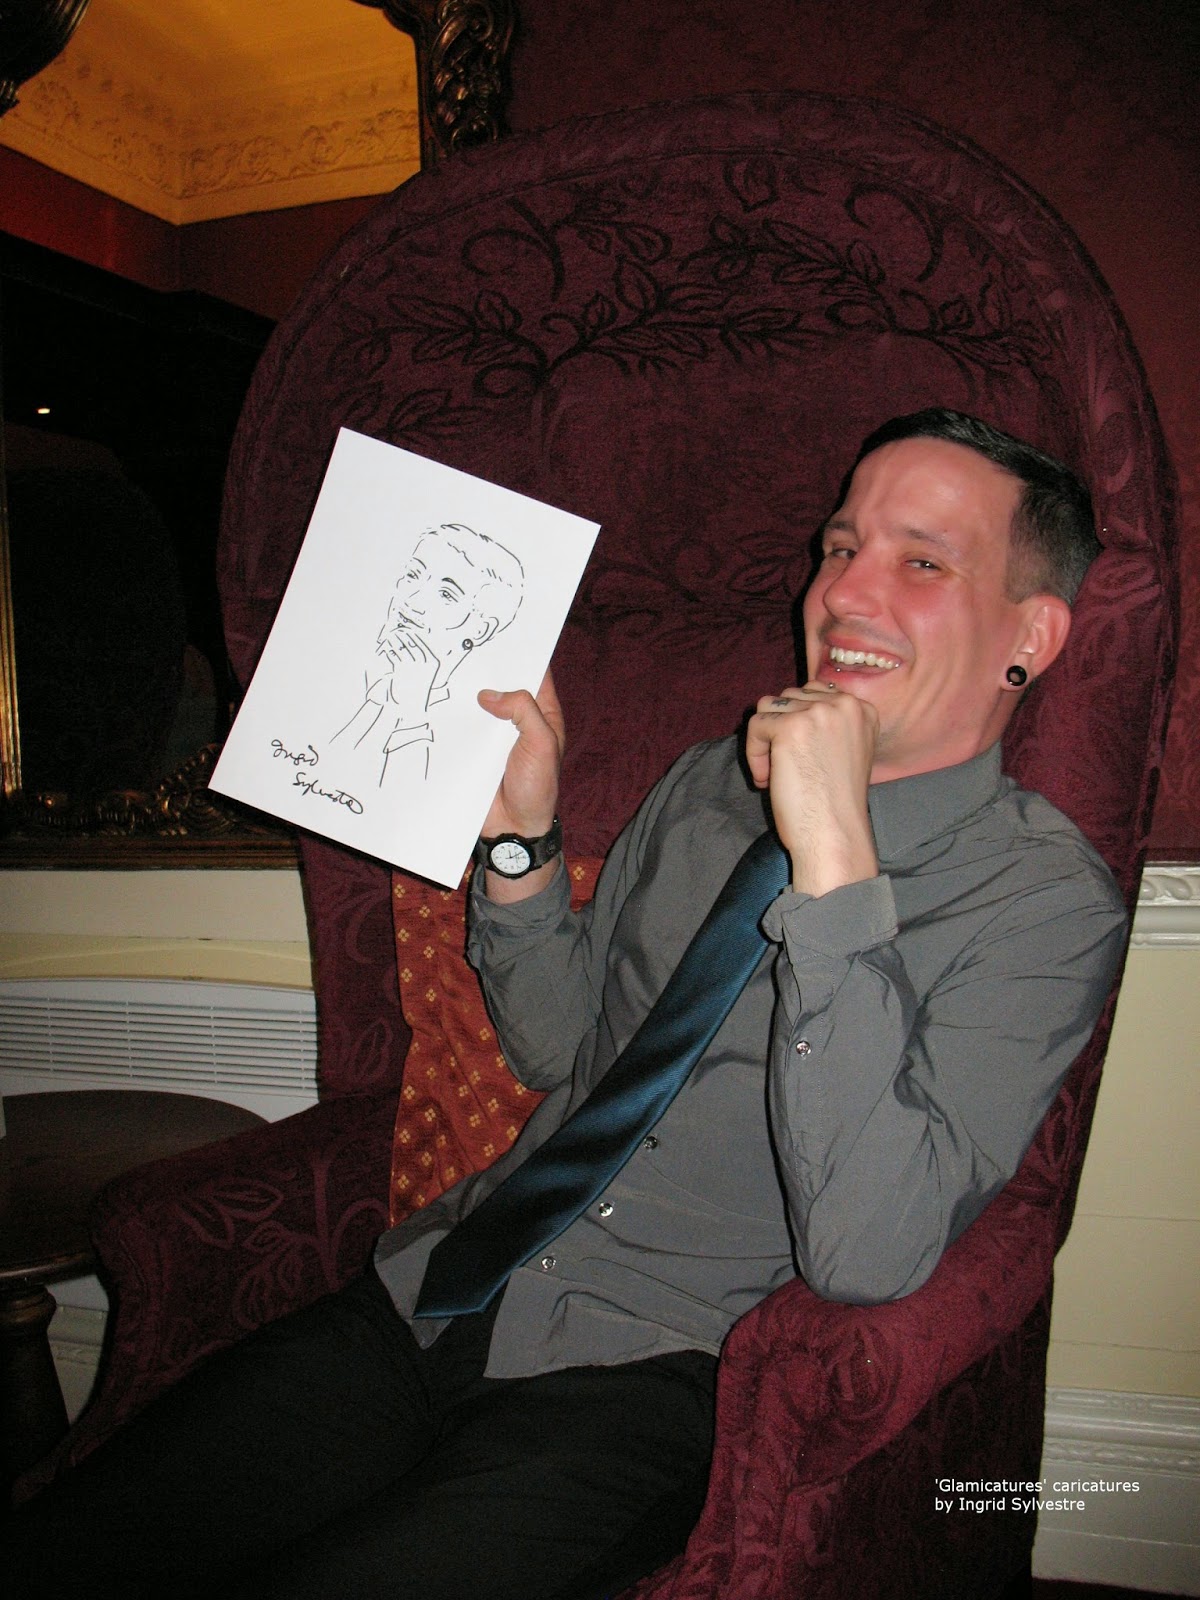 Glamicature wedding caricatures by UK caricaturist Ingrid Sylvestre at the wedding of Hannah and David at Lumley Castle County Durham